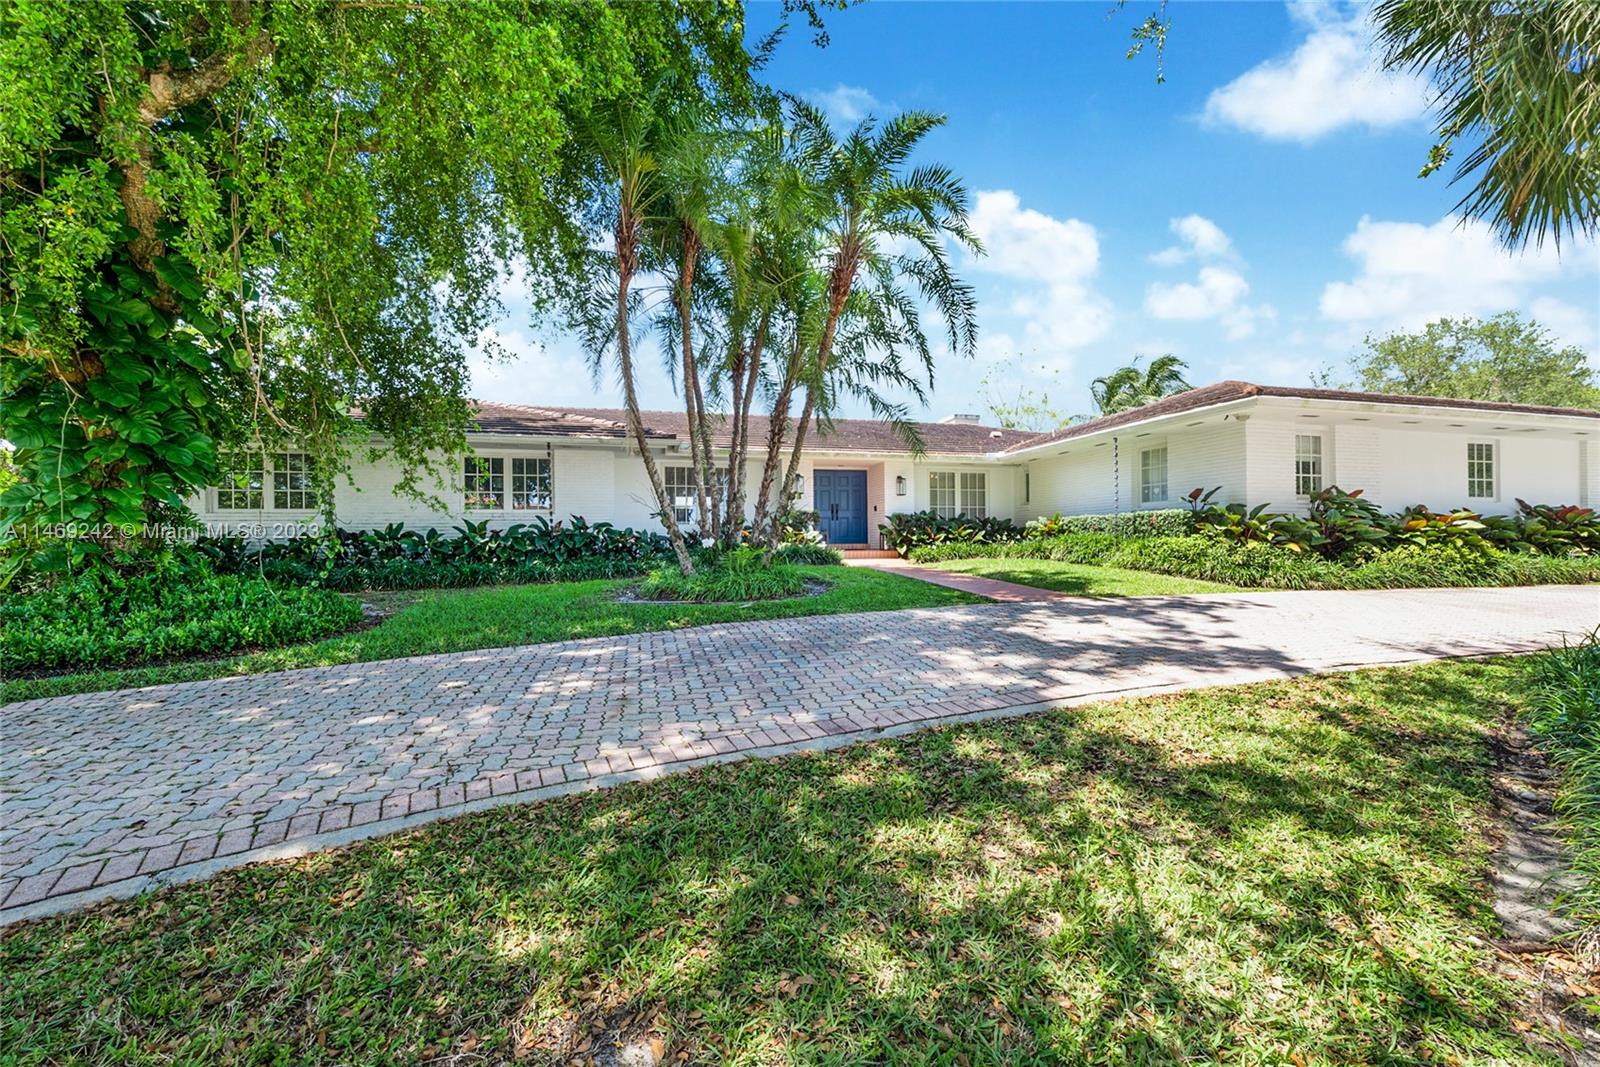 Incredible opportunity to remodel or build new and experience direct ocean access with no bridges to Biscayne Bay and wide water views with 105 feet of water-frontage and a dock that could accommodate a large boat in one of Coral Gables most sought after gated communities, Old Cutler Bay.  This one-story 5 bedroom, 3 bathroom home with southern exposure, allowing the property to receive ample sunlight throughout the day. The screened in patio with swimming pool combined with a perfect blend of wide-water lagoon views and warm, inviting home. Impact windows and doors, large kitchen with breakfast nook, overlooking the water. 2-car garage.